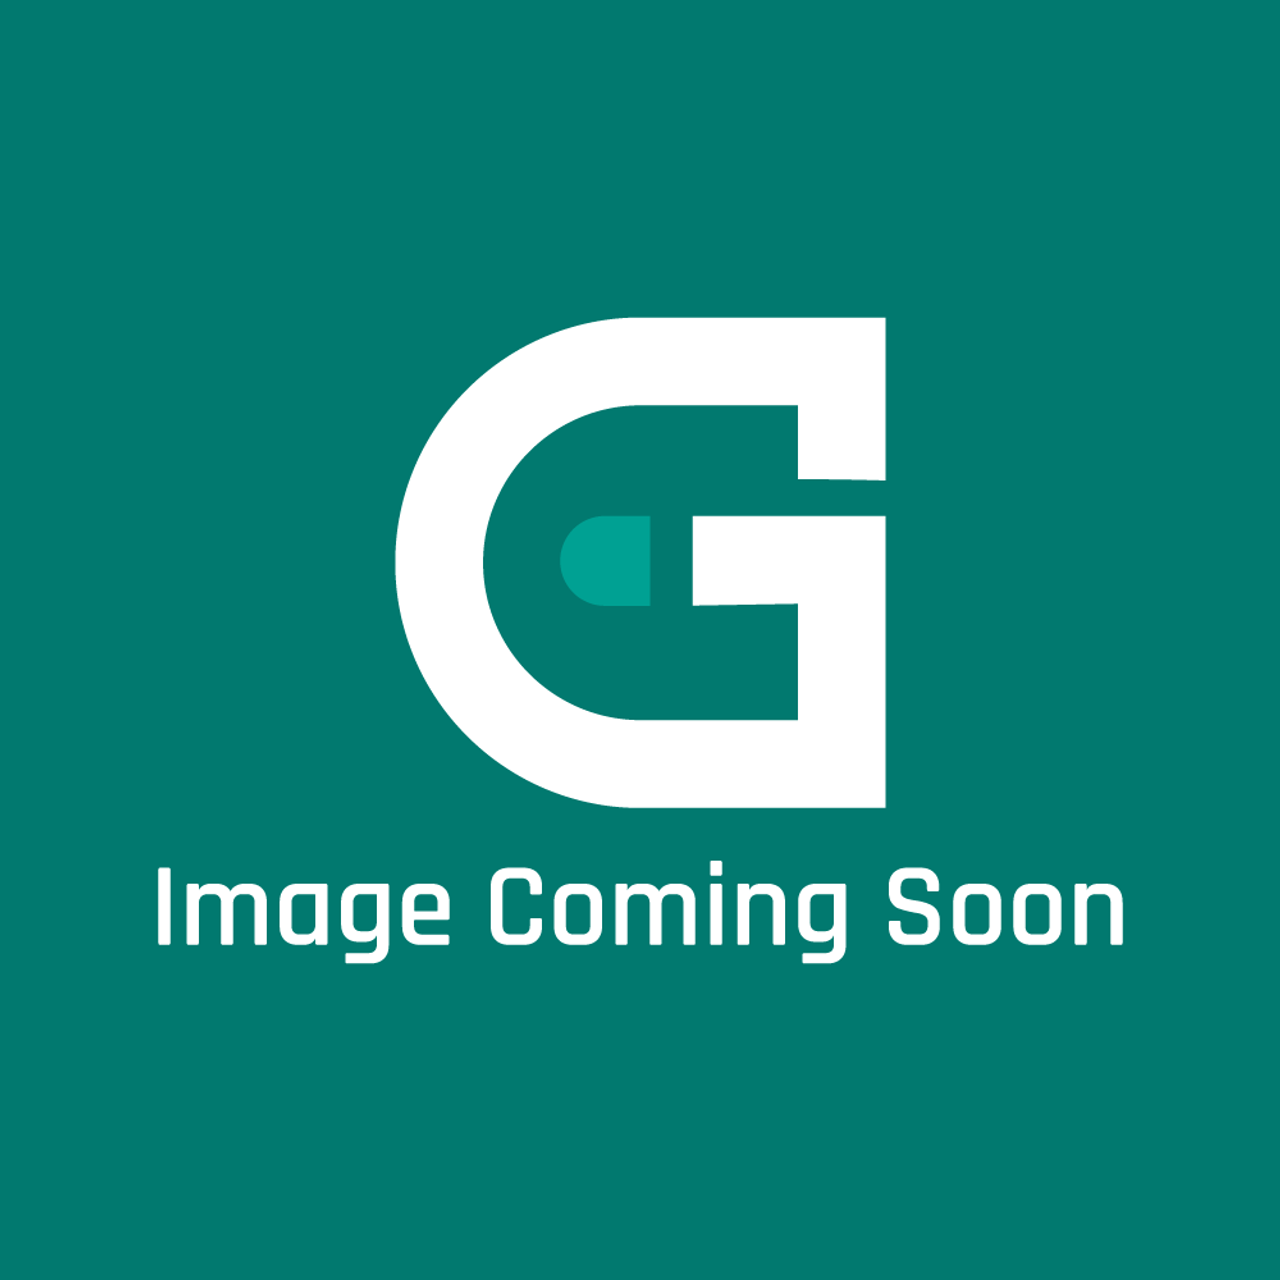 GE Appliances WB56X20057 - Panel Asm Bonded (Si-Wh) - Image Coming Soon!